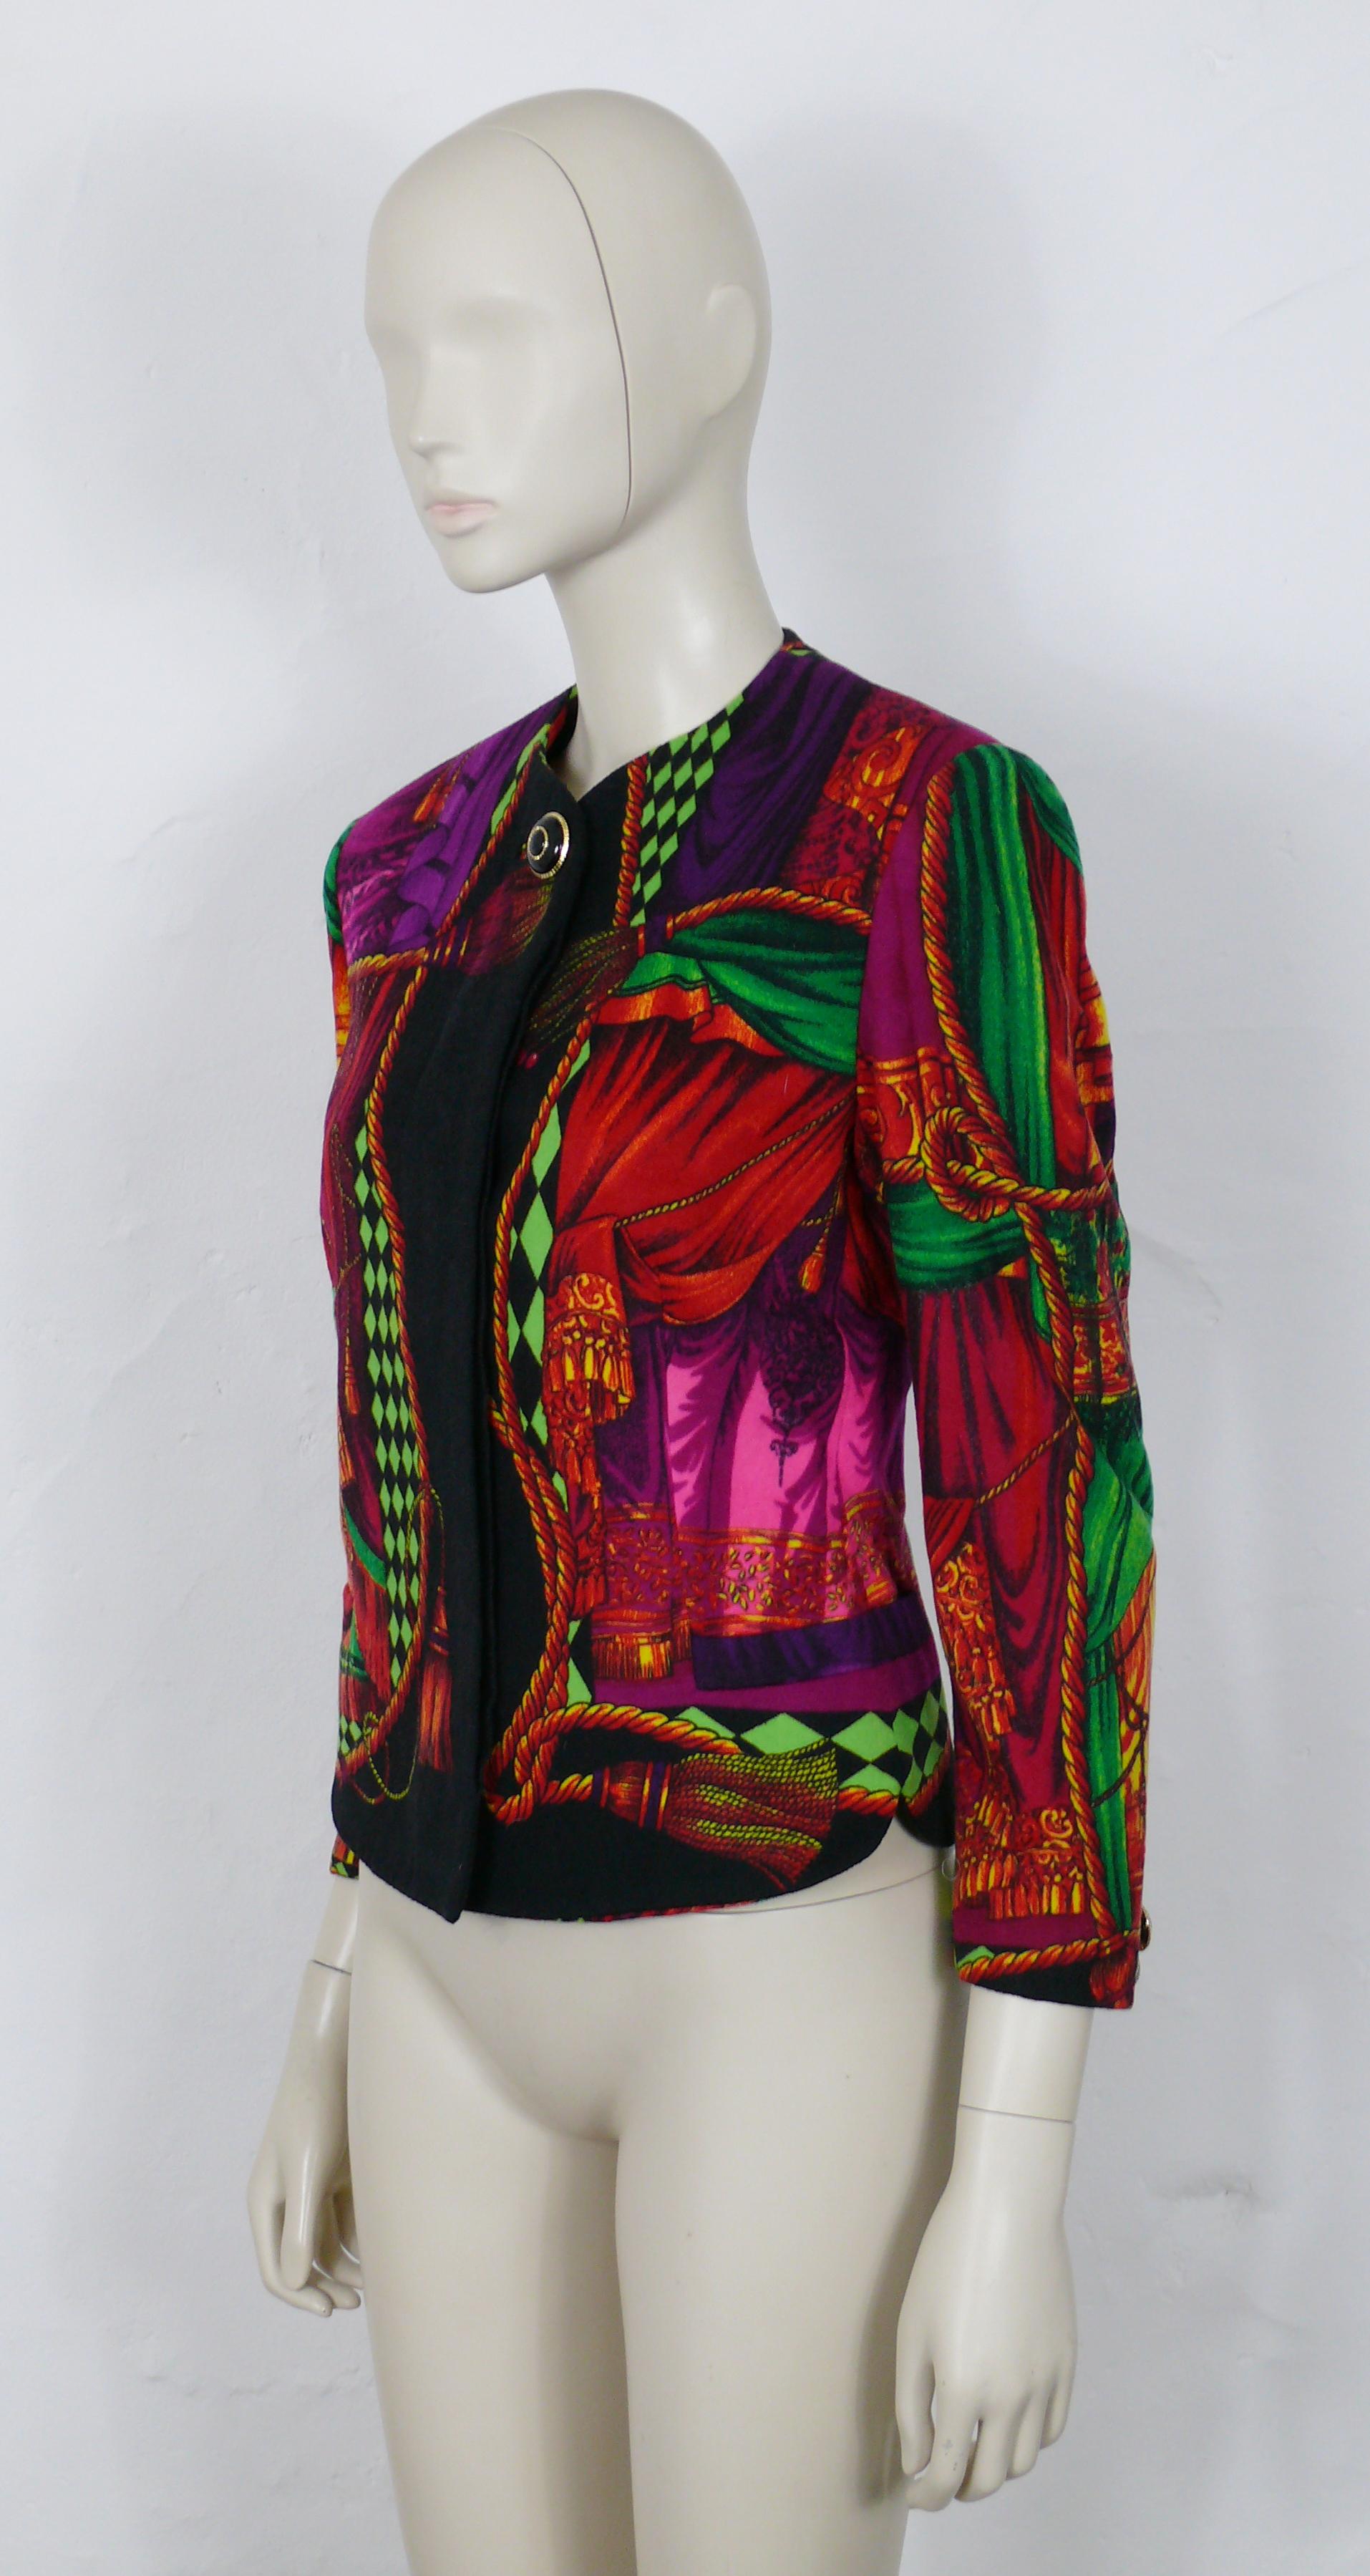 Beige Gianni Versace Couture Iconic Fall/Winter 1991/92 Teather Drape Print Jacket For Sale